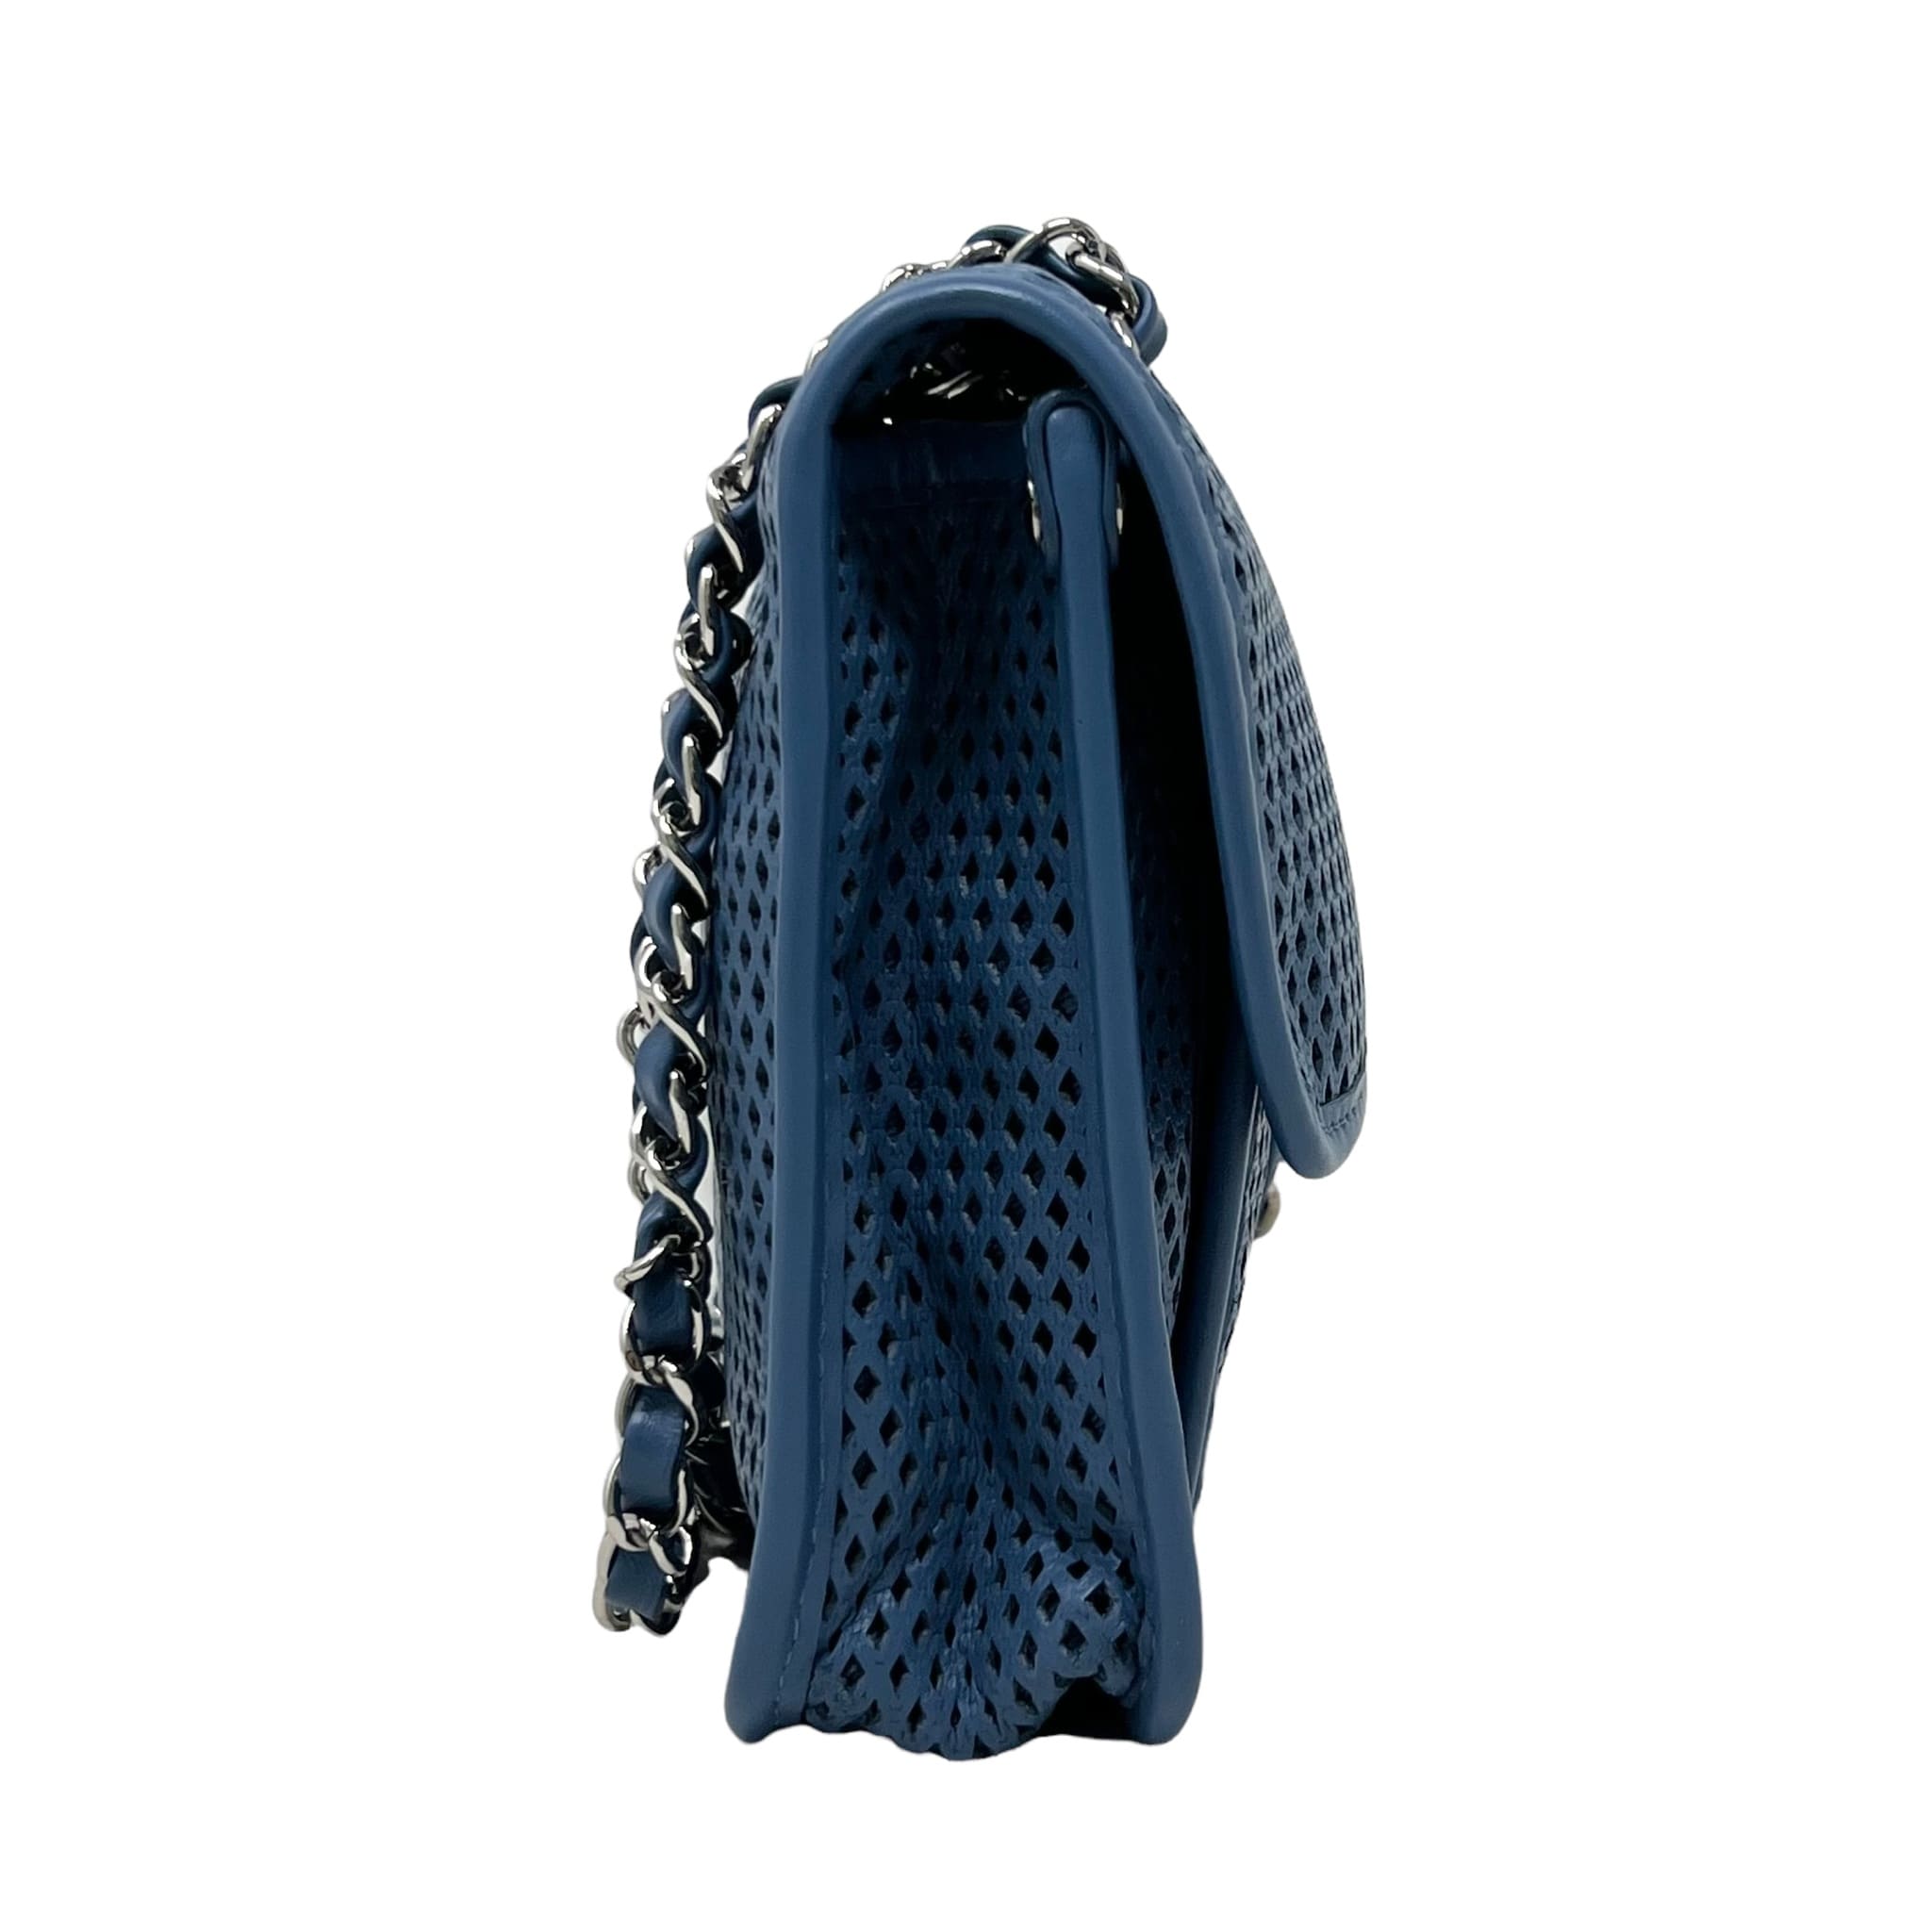 Chanel Blue Perforated French Riviera Flap Bag